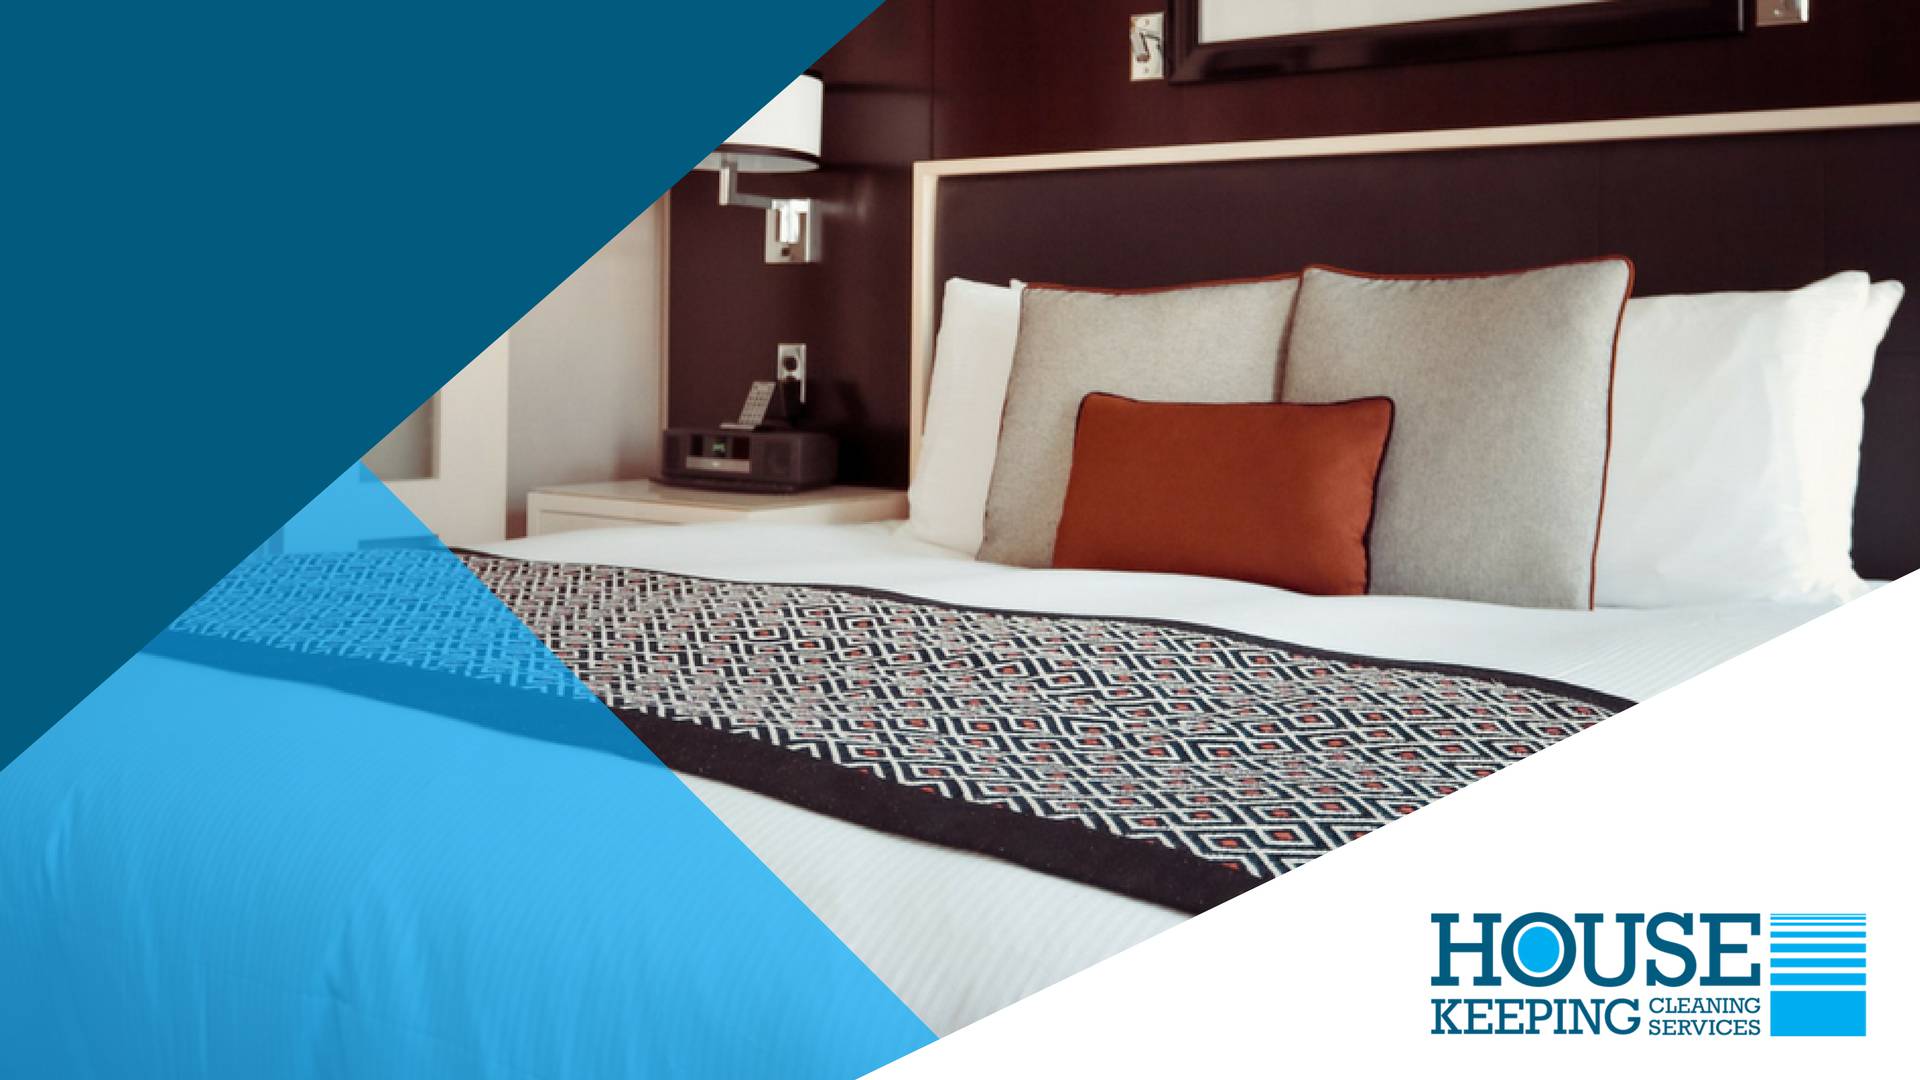 Housekeeping-Cleaning-Services-hotels